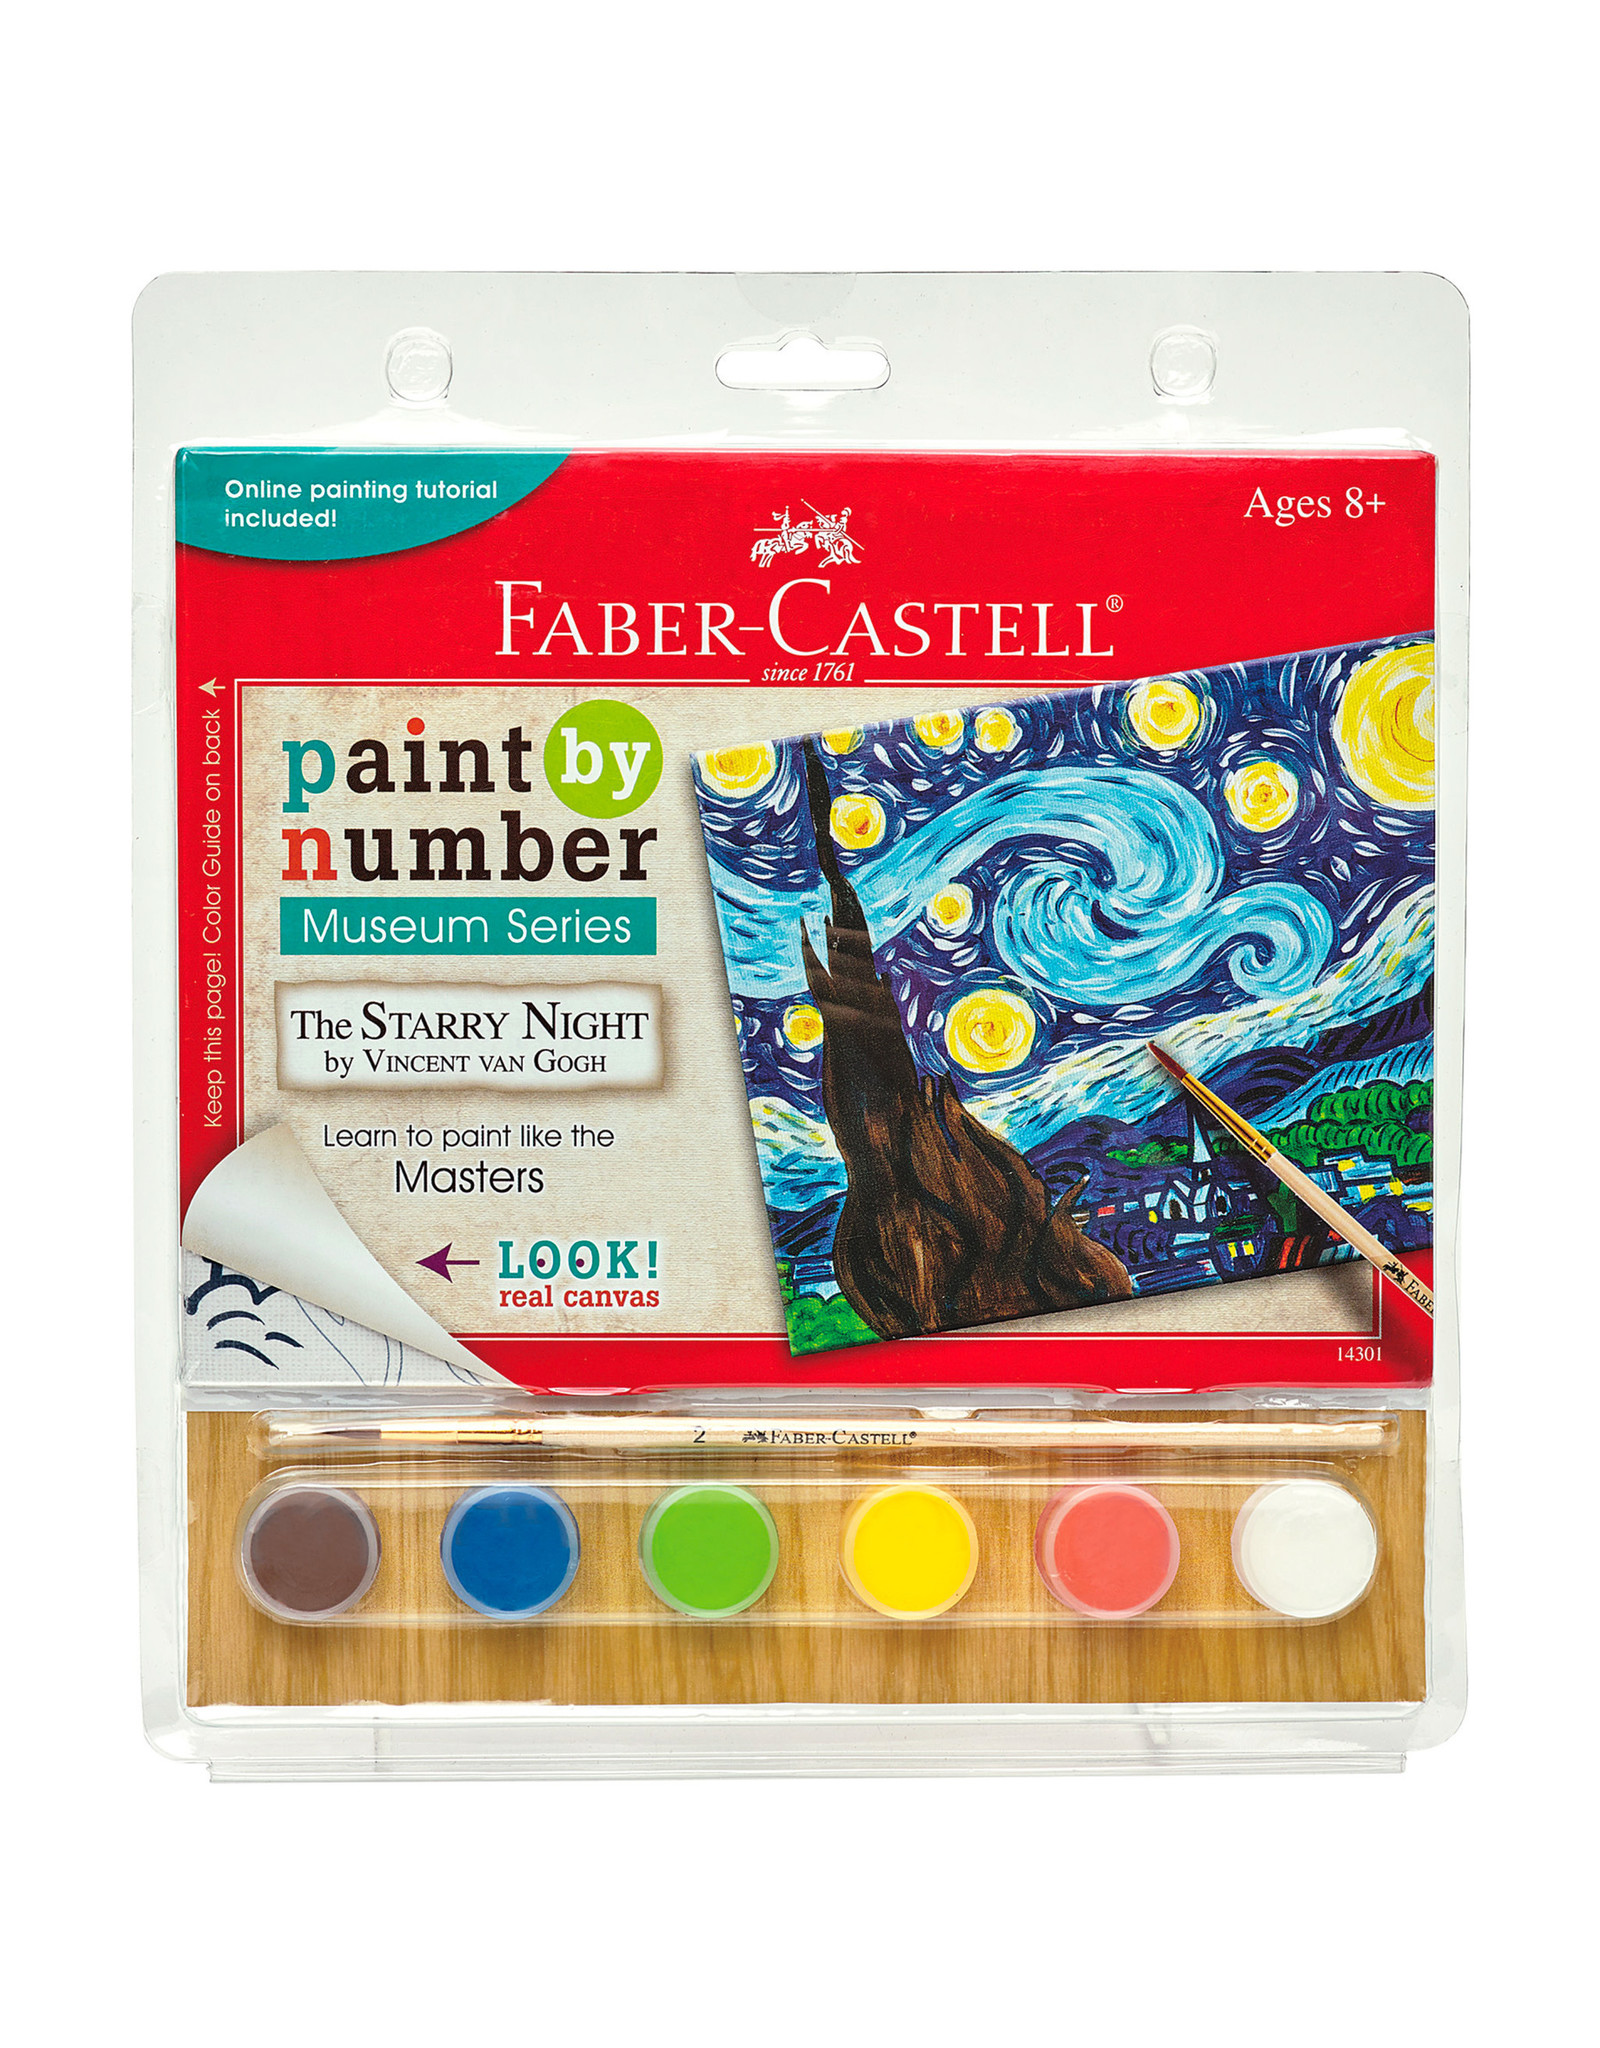 FABER-CASTELL Faber-Castell Paint by Number Museum Series, The Starry Night